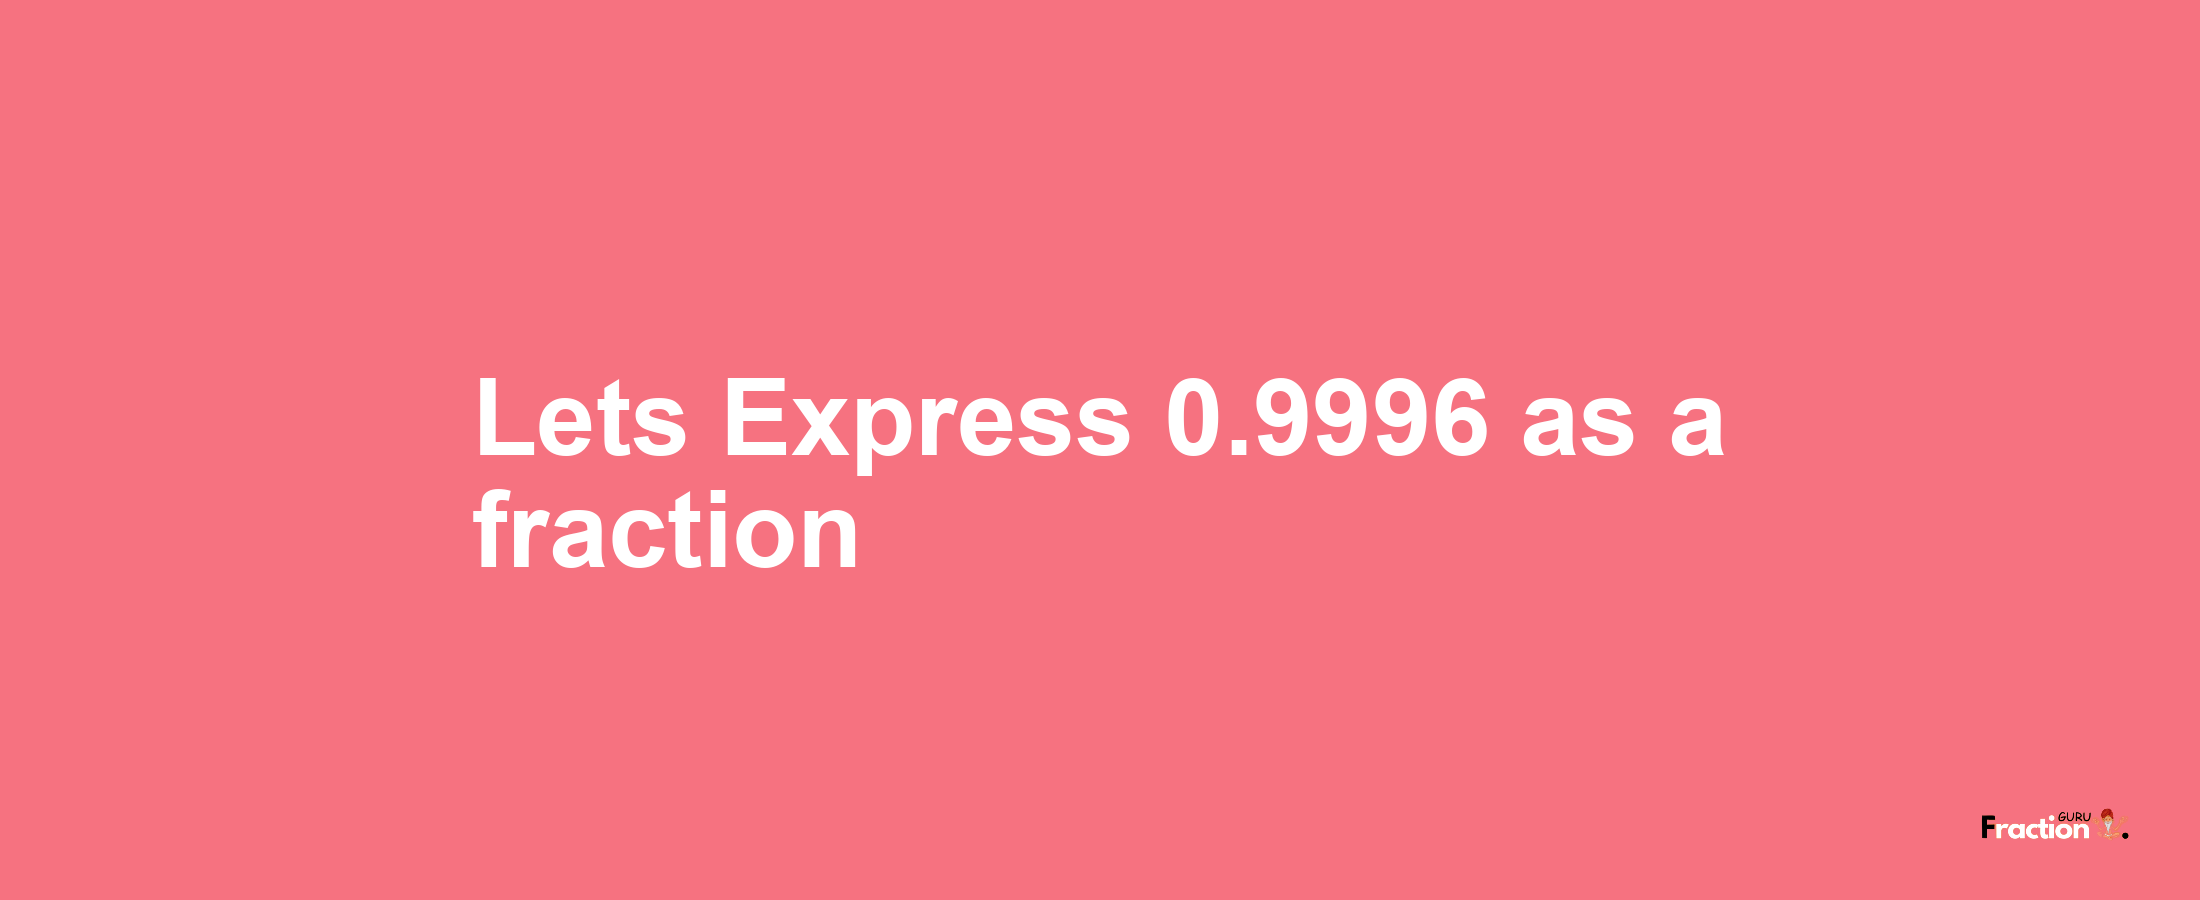 Lets Express 0.9996 as afraction